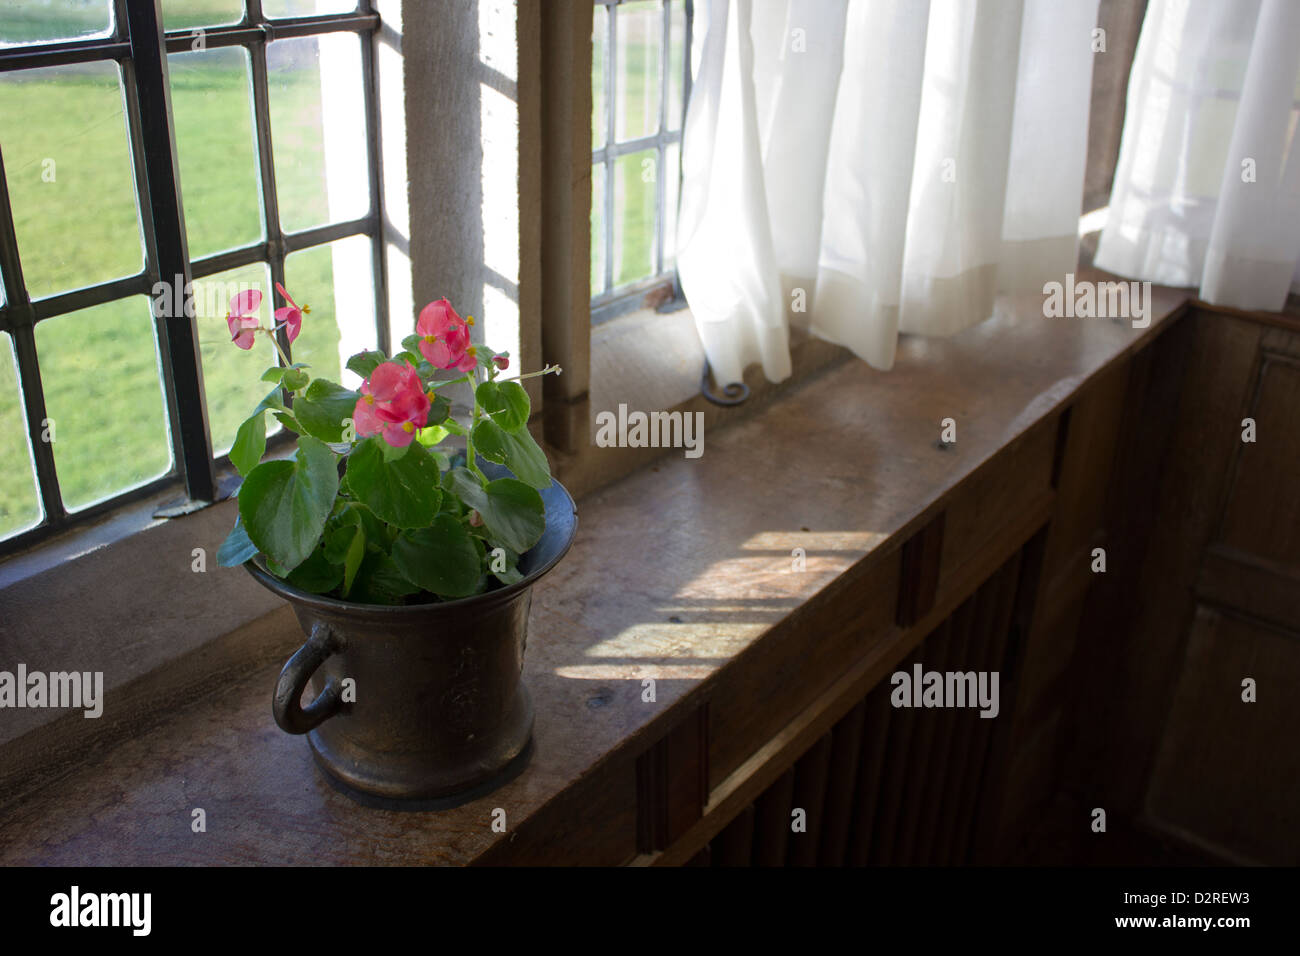 Begonia flower plant displayed in a copper pot on a window. Stock Photo